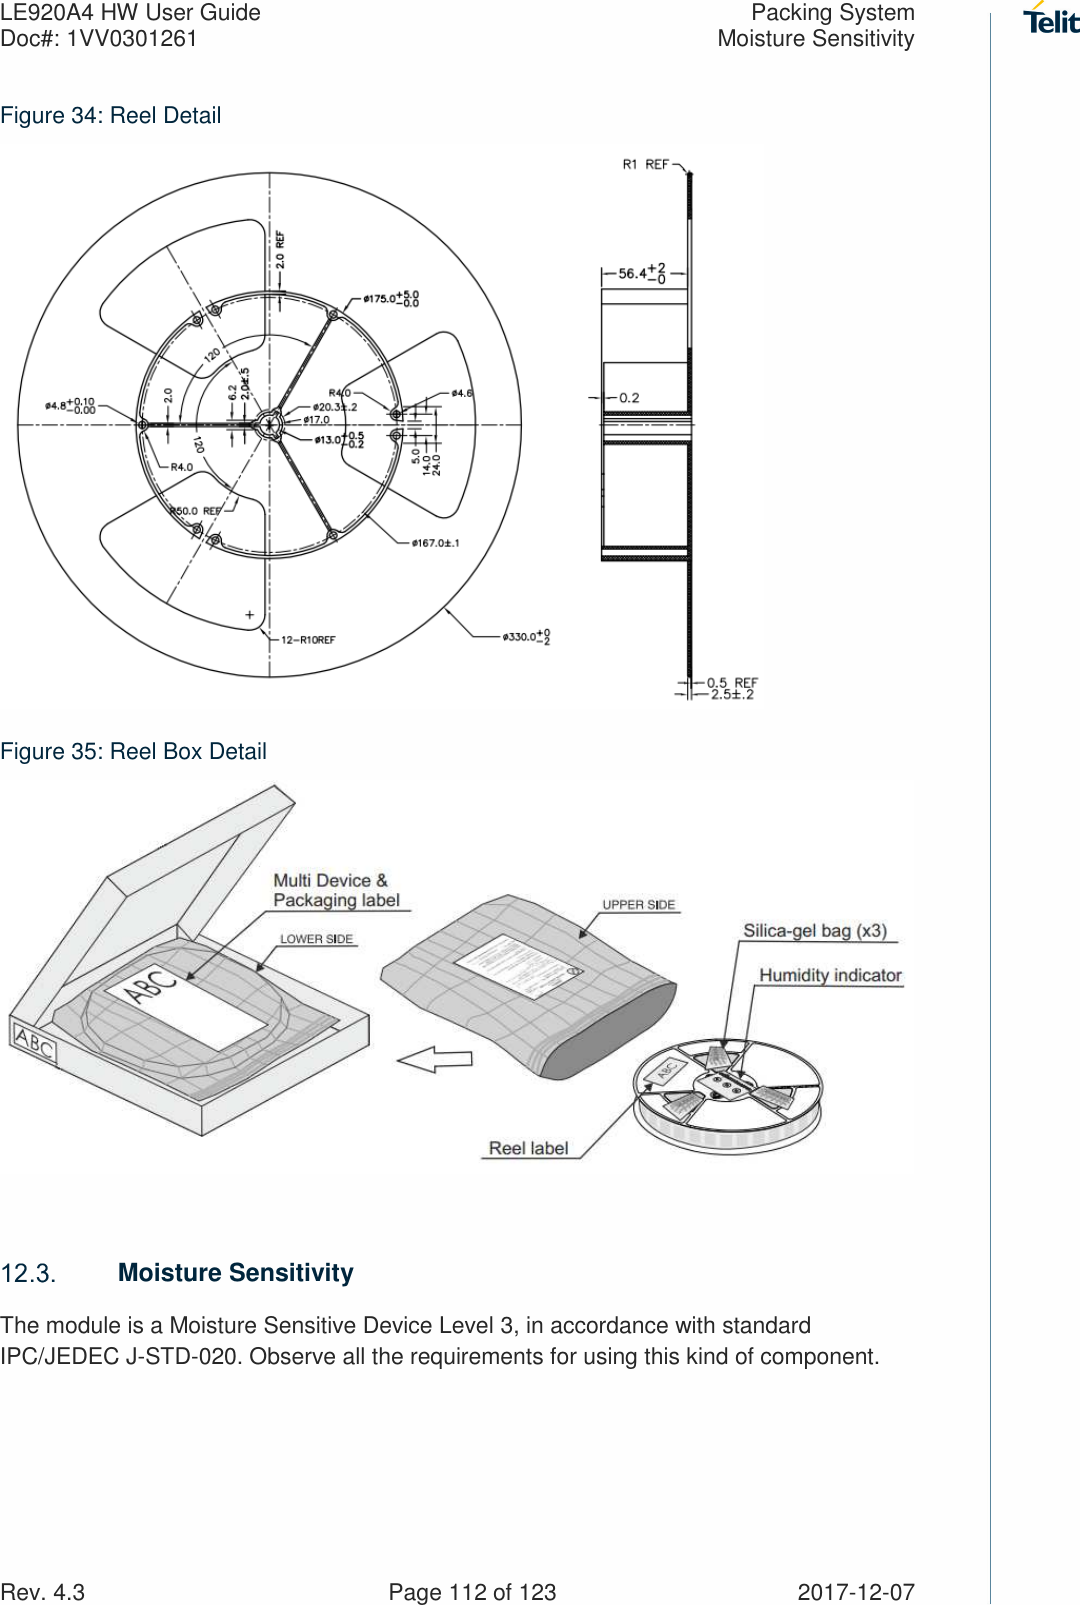 LE920A4 HW User Guide  Packing System Doc#: 1VV0301261  Moisture Sensitivity Rev. 4.3    Page 112 of 123  2017-12-07 Figure 34: Reel Detail  Figure 35: Reel Box Detail    Moisture Sensitivity The module is a Moisture Sensitive Device Level 3, in accordance with standard IPC/JEDEC J-STD-020. Observe all the requirements for using this kind of component.     